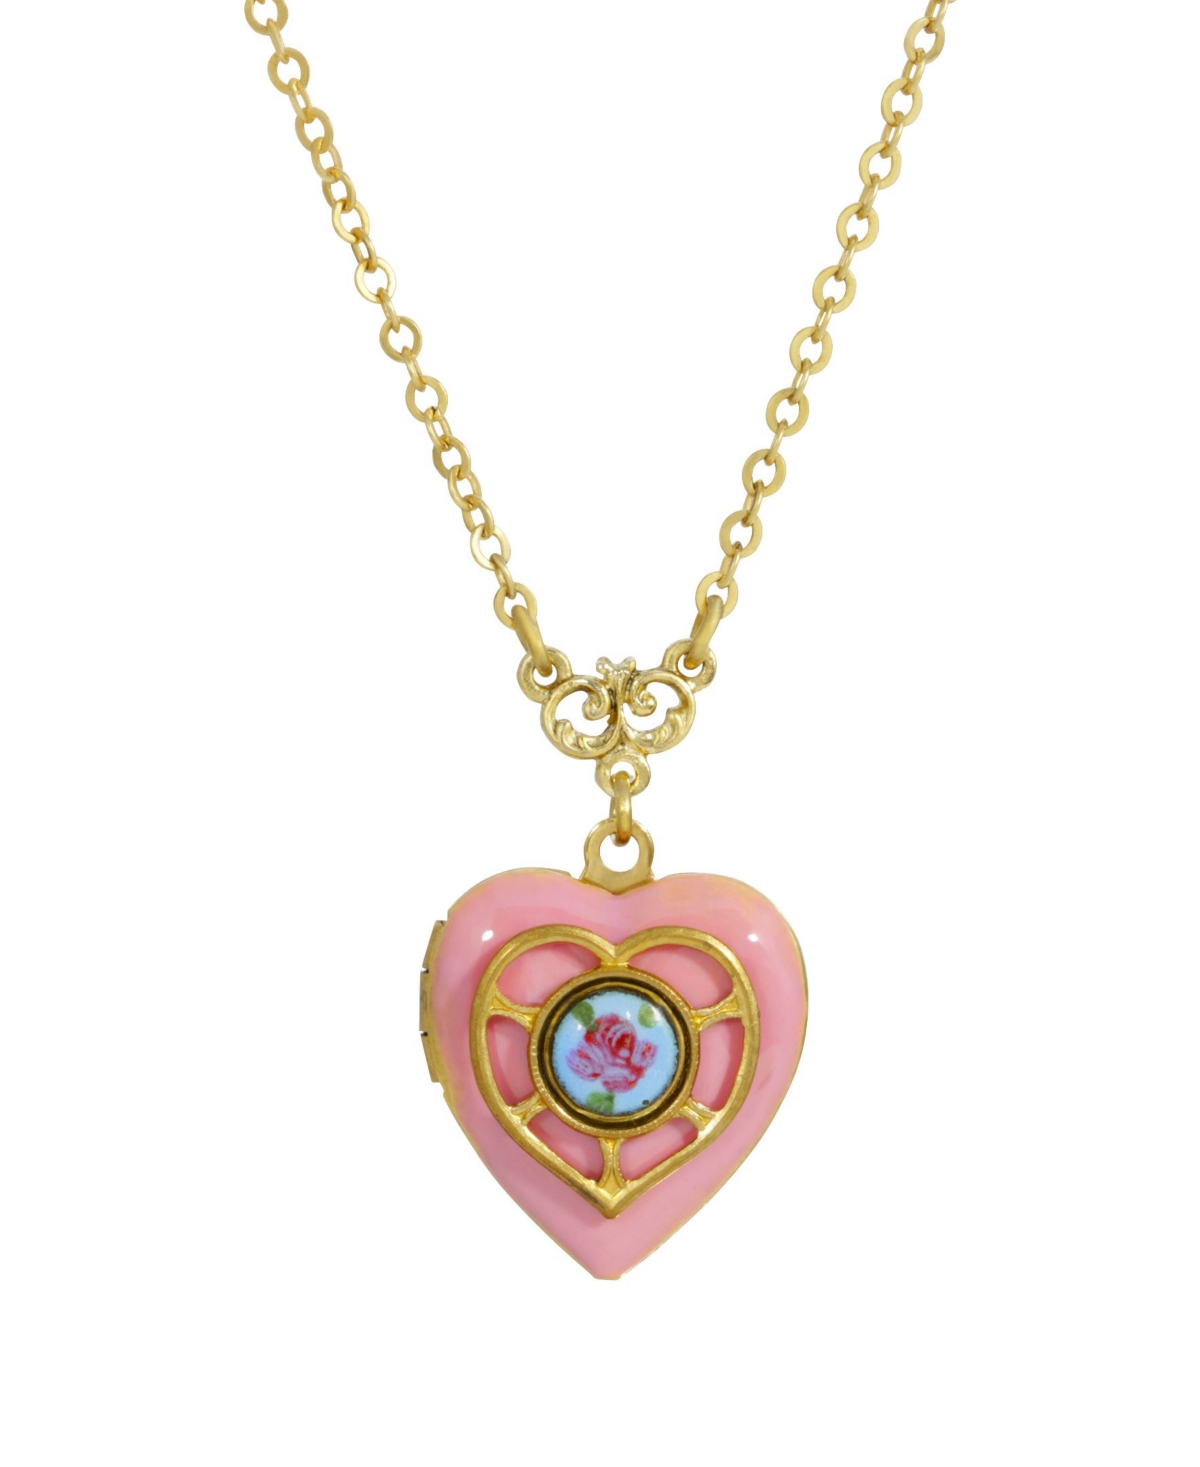 2028 Heart Locket Necklace In Pink